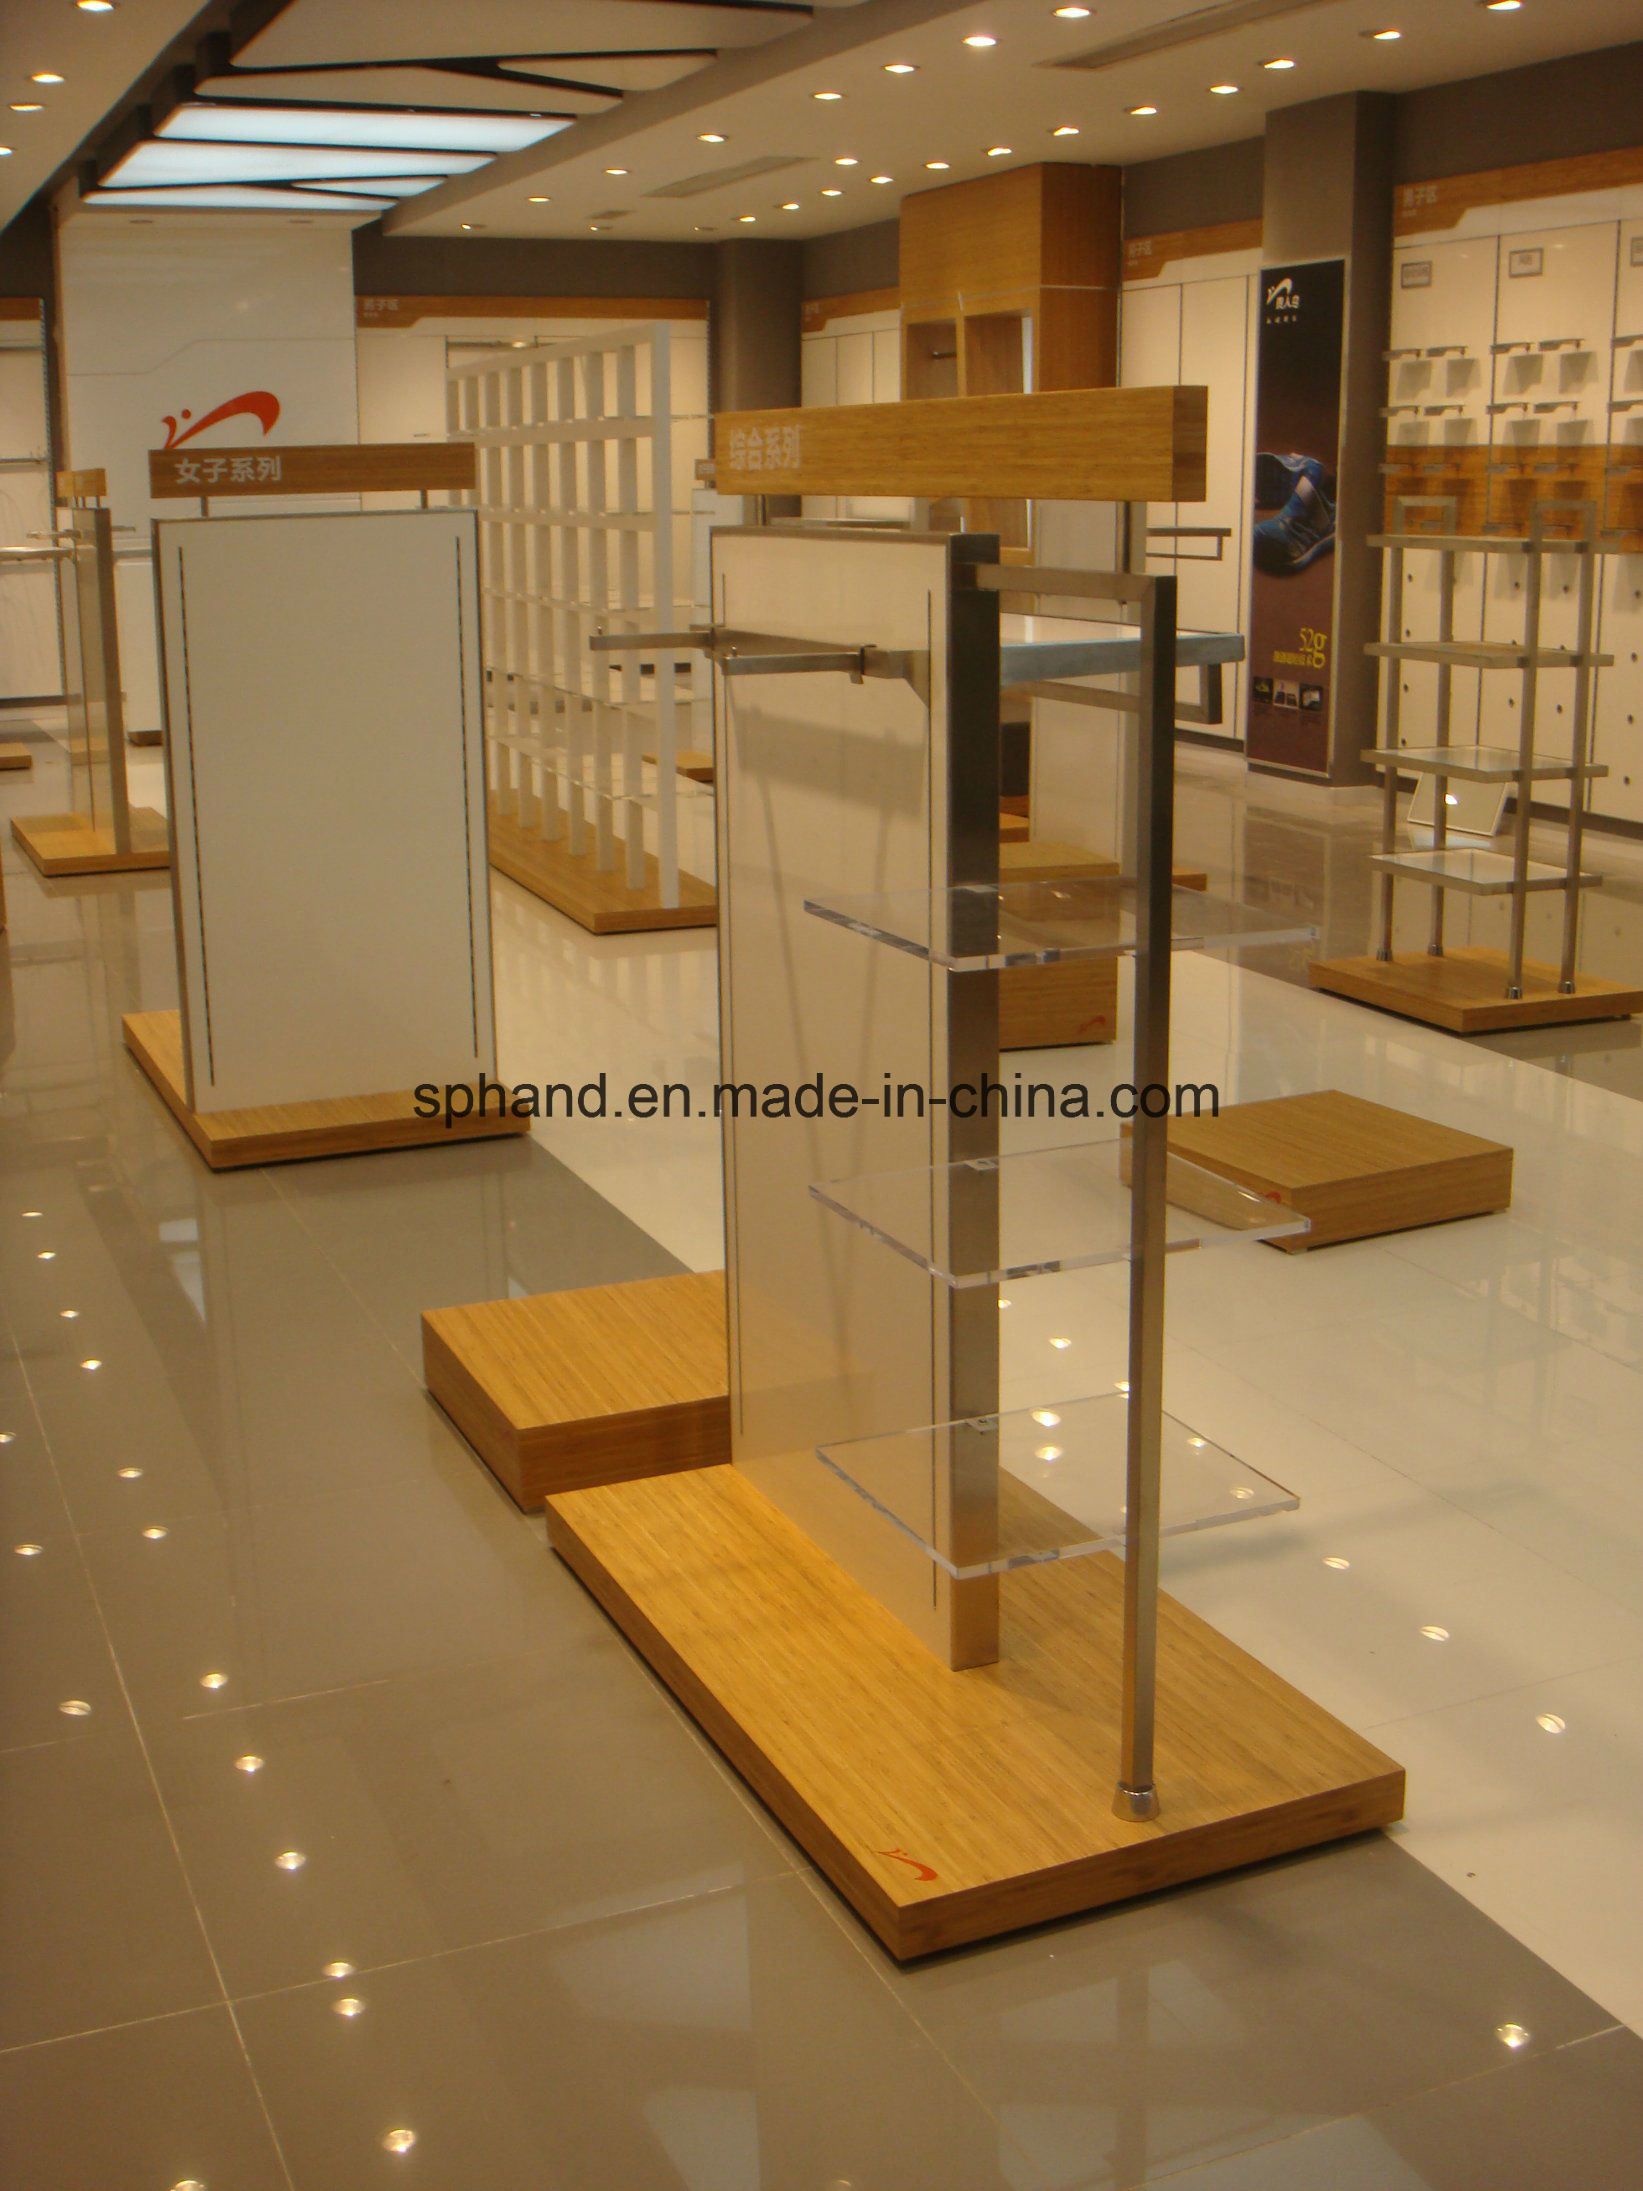 /proimages/2f0j00ZERYcTtatUqQ/bamboo-stainless-steel-acrylic-combined-display-rack-for-garment-shoes.jpg